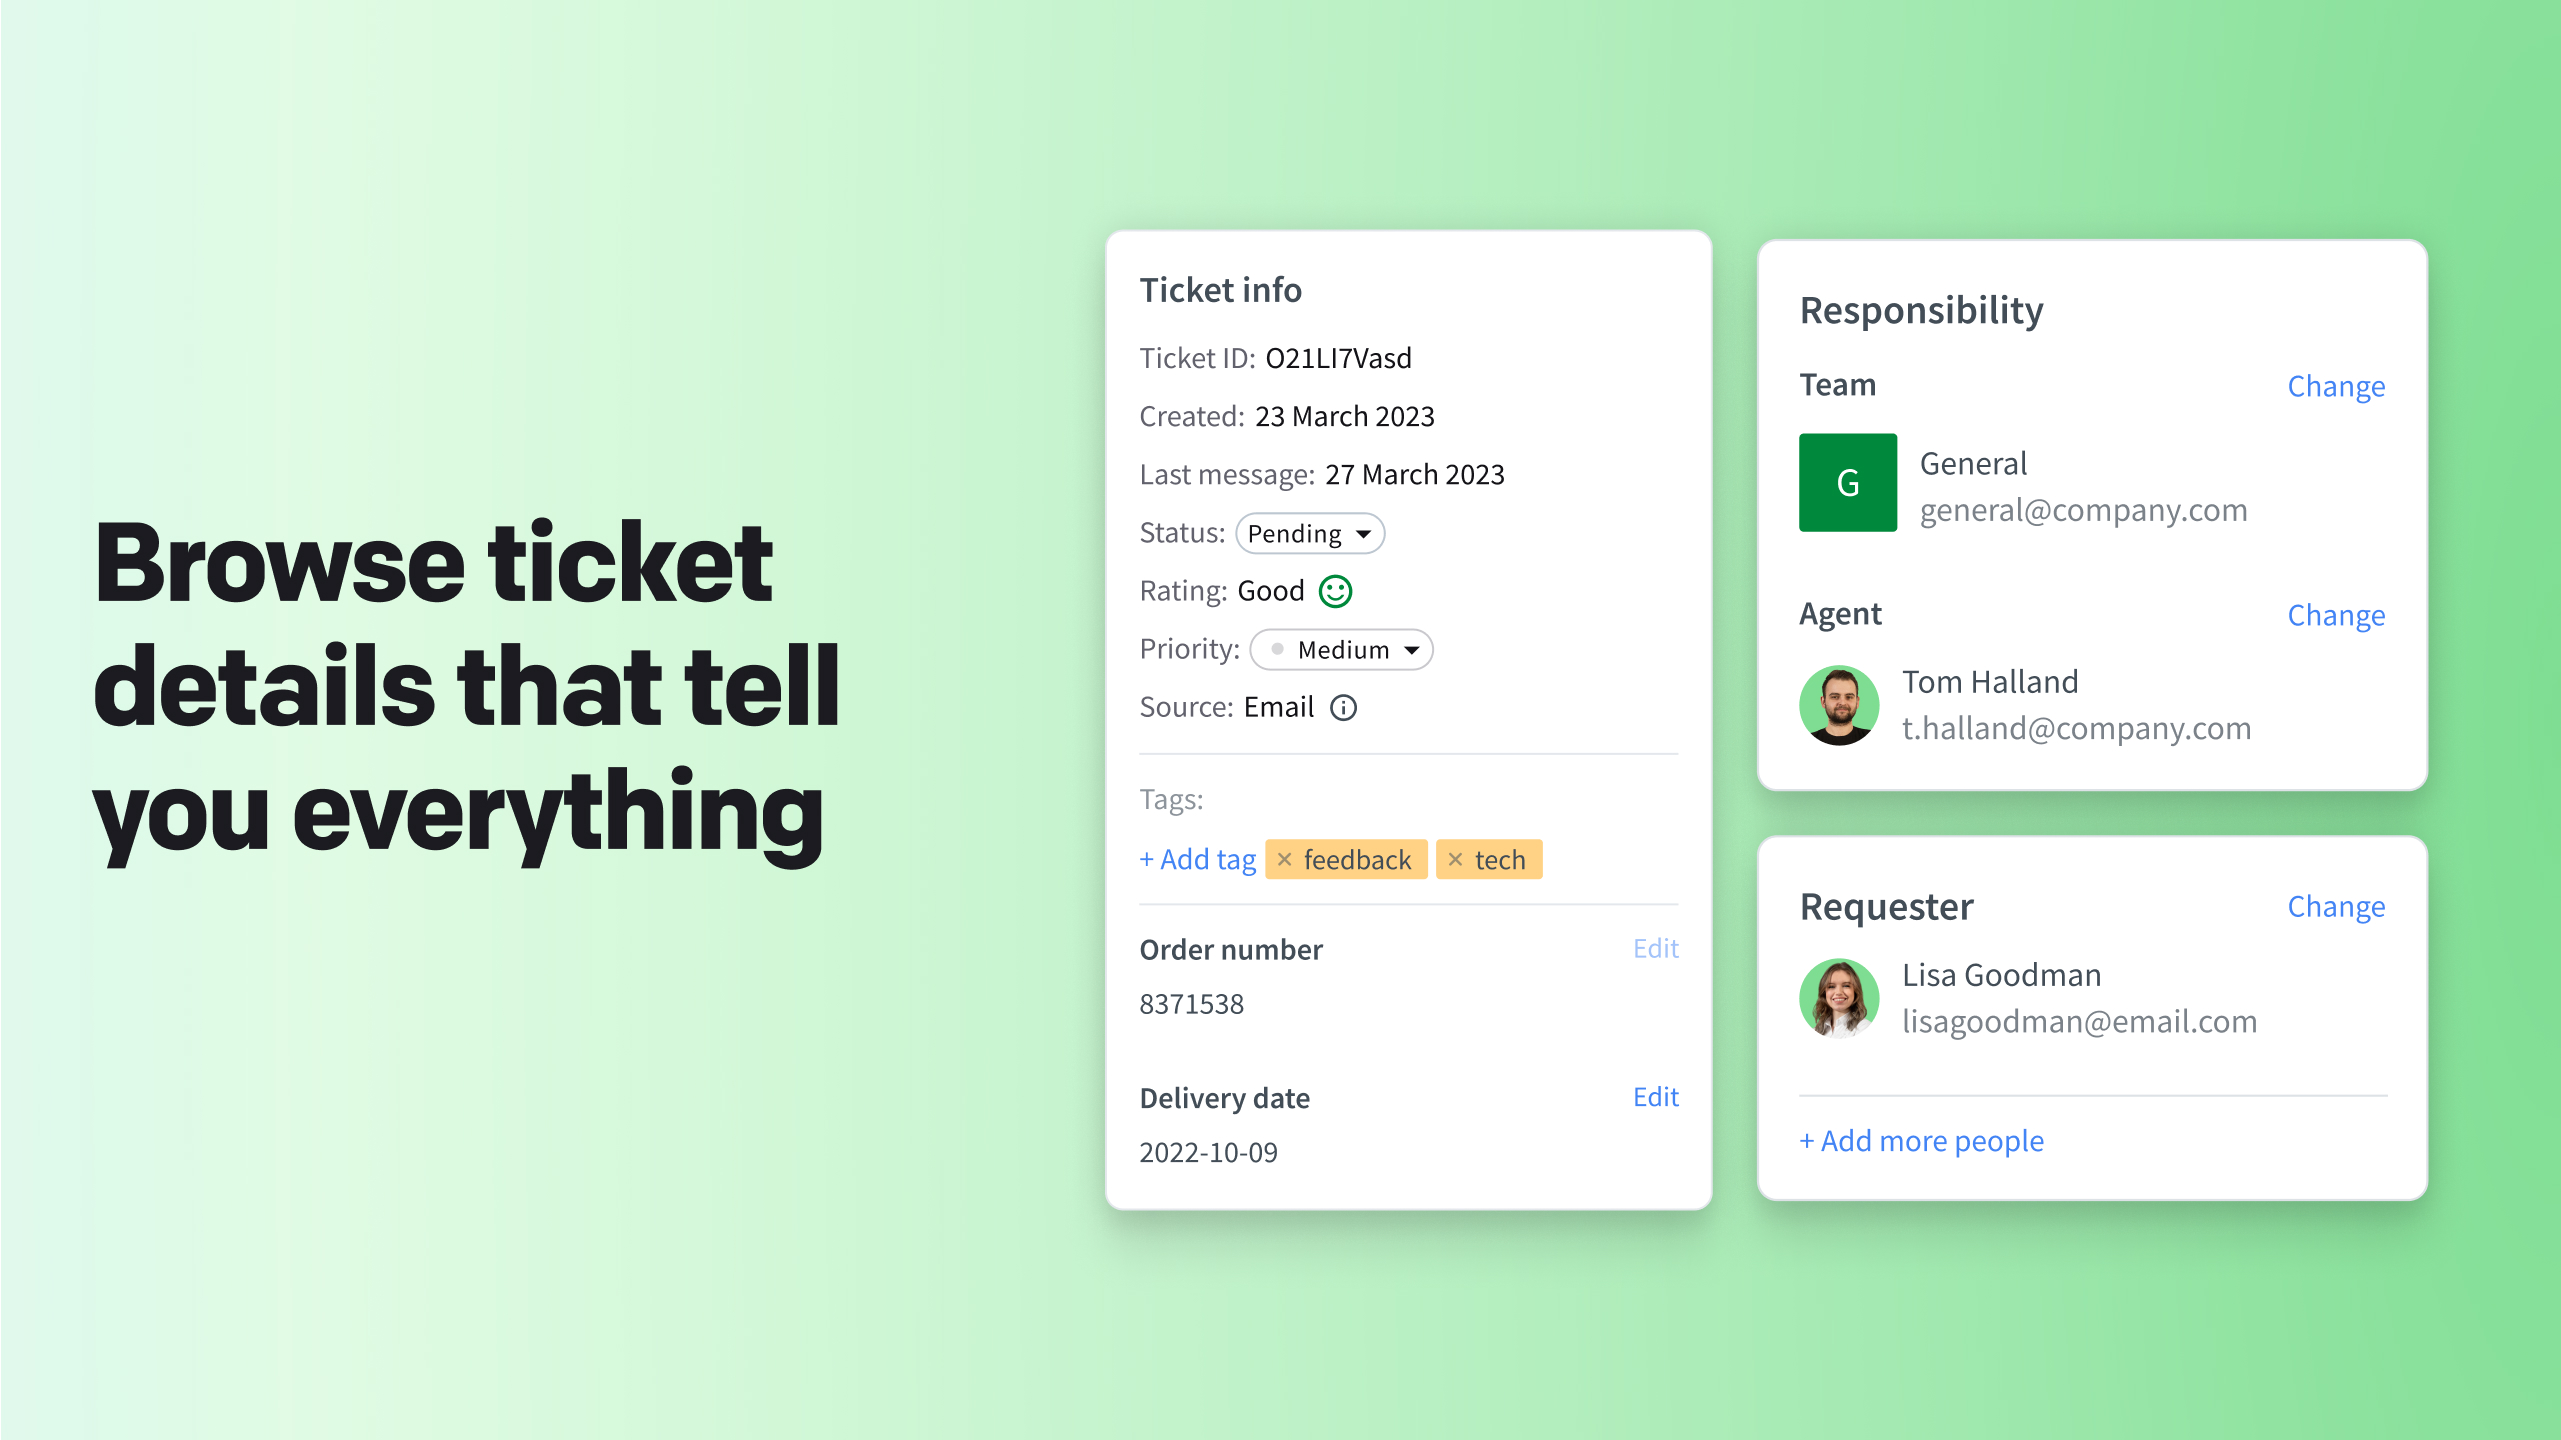 Browse ticket details that tell you everything